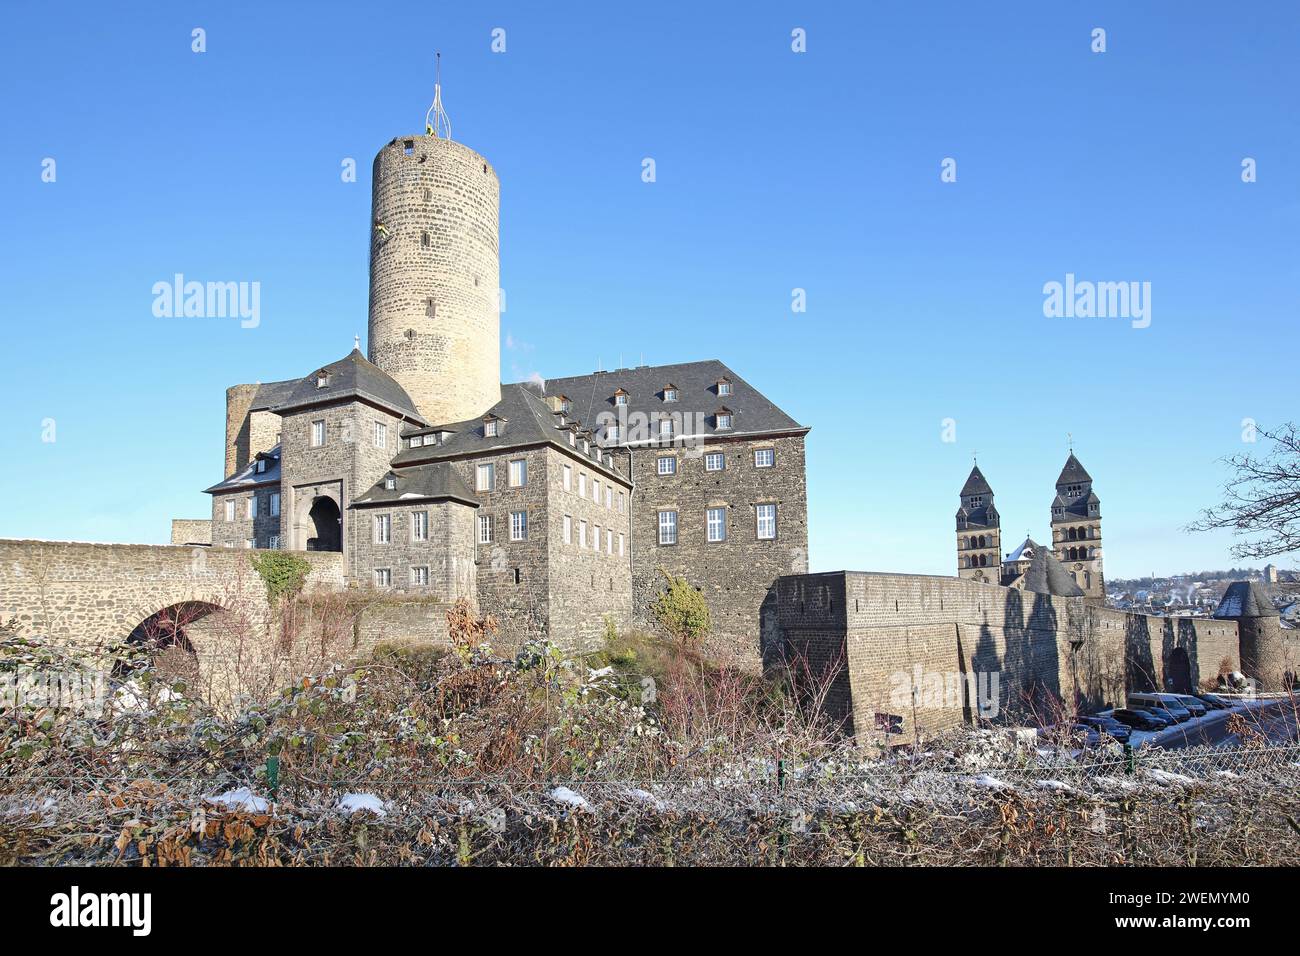 Genoveva Castle built in the 13th century with keep Goloturm, neo-Romanesque Herz-Jesu-Kirche built in 1911 with twin towers and historic town Stock Photo